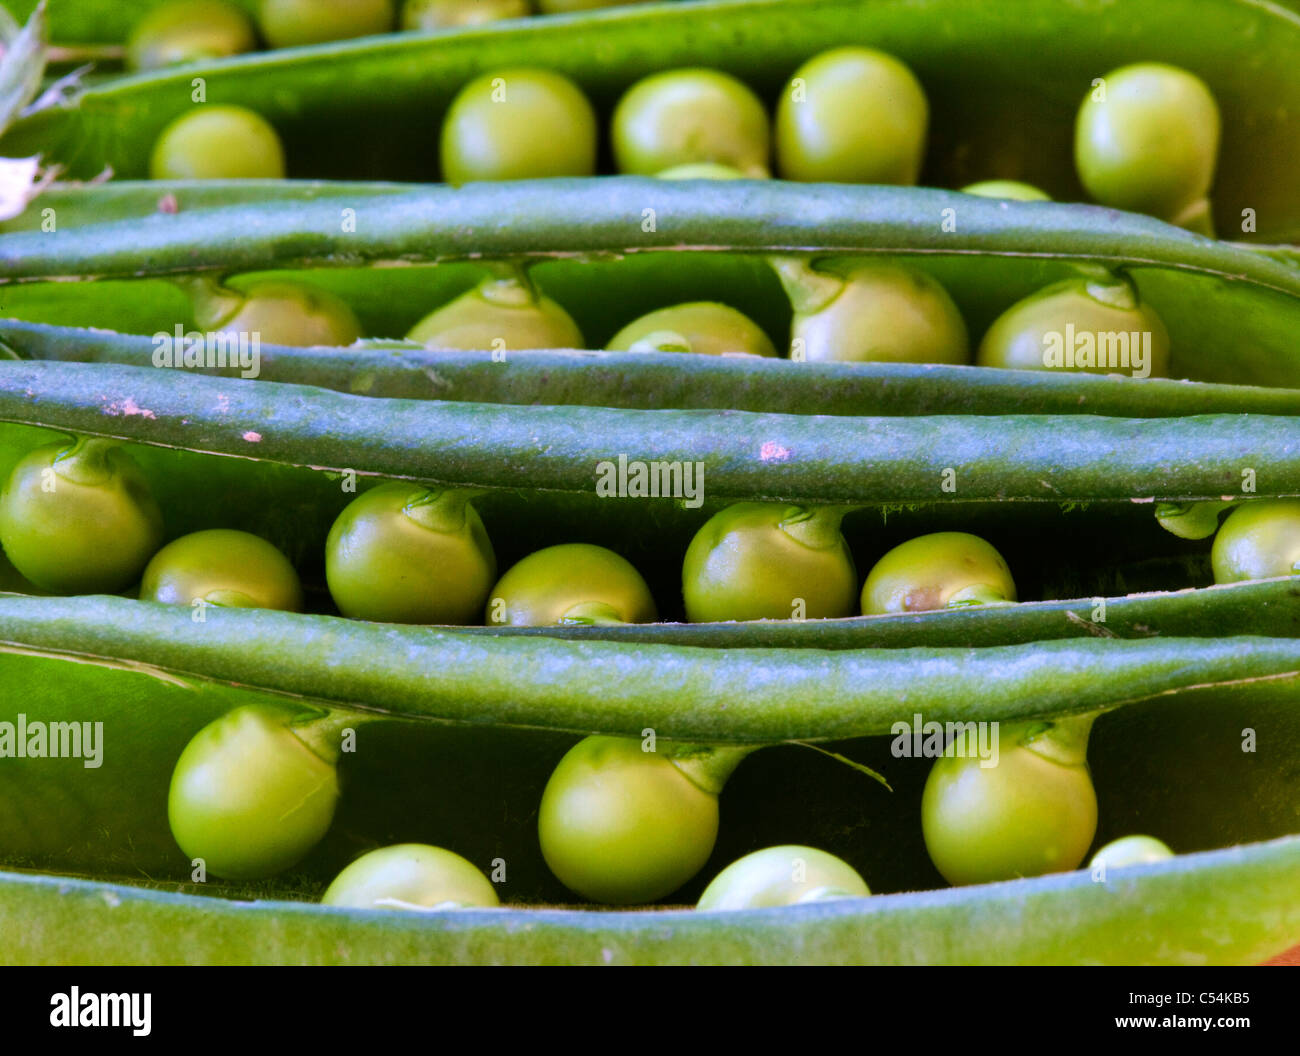 A close up of peas in pods Stock Photo